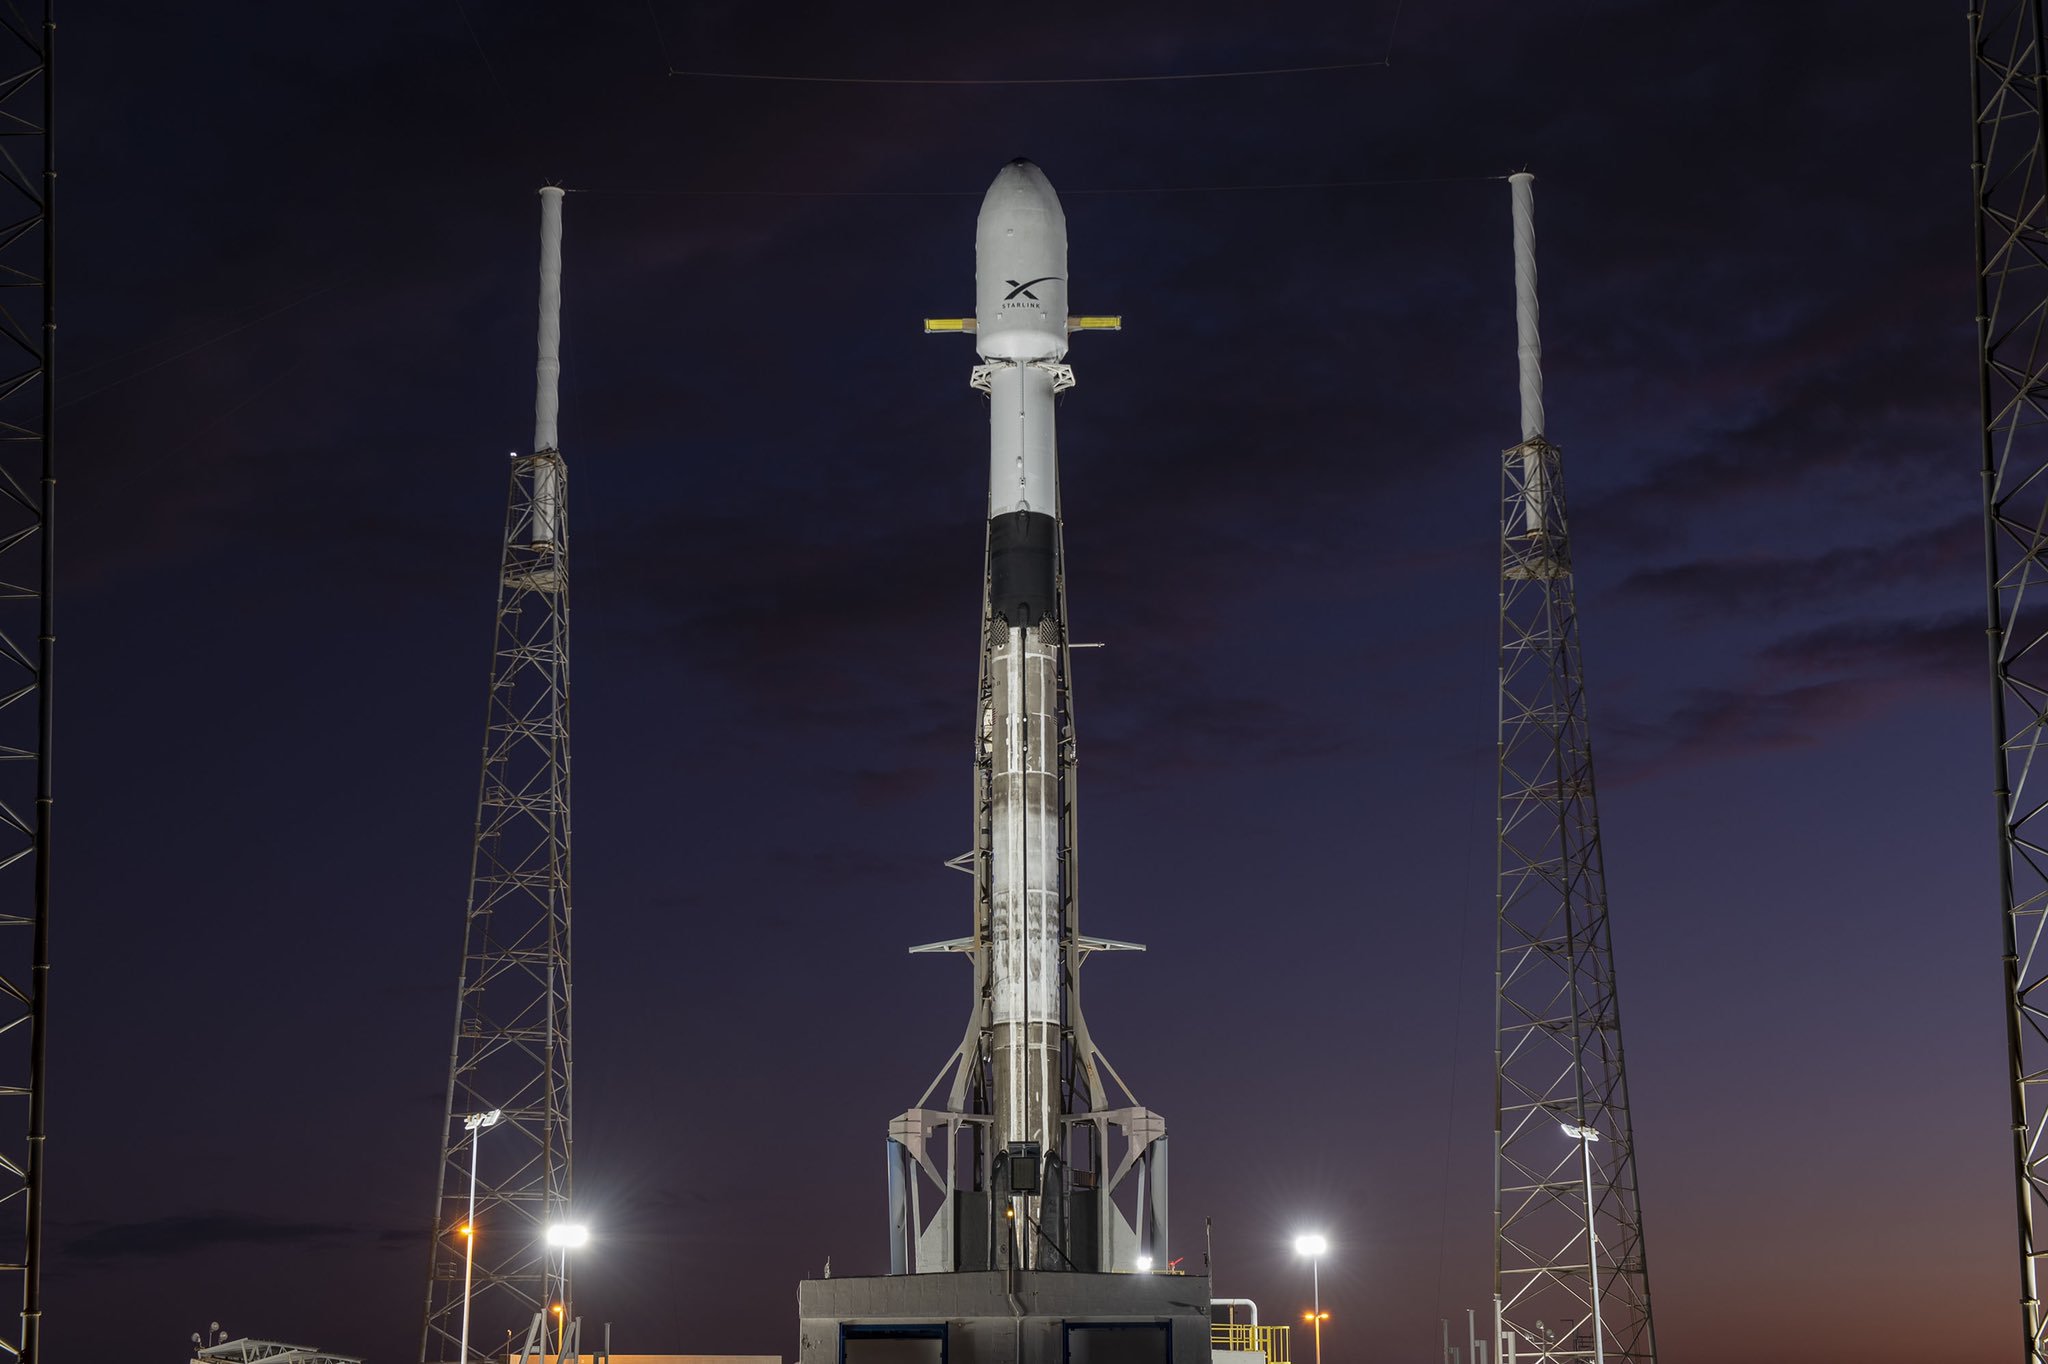 Federal Communications Commission denies nearly $1,000,000,000 in funding to SpaceX